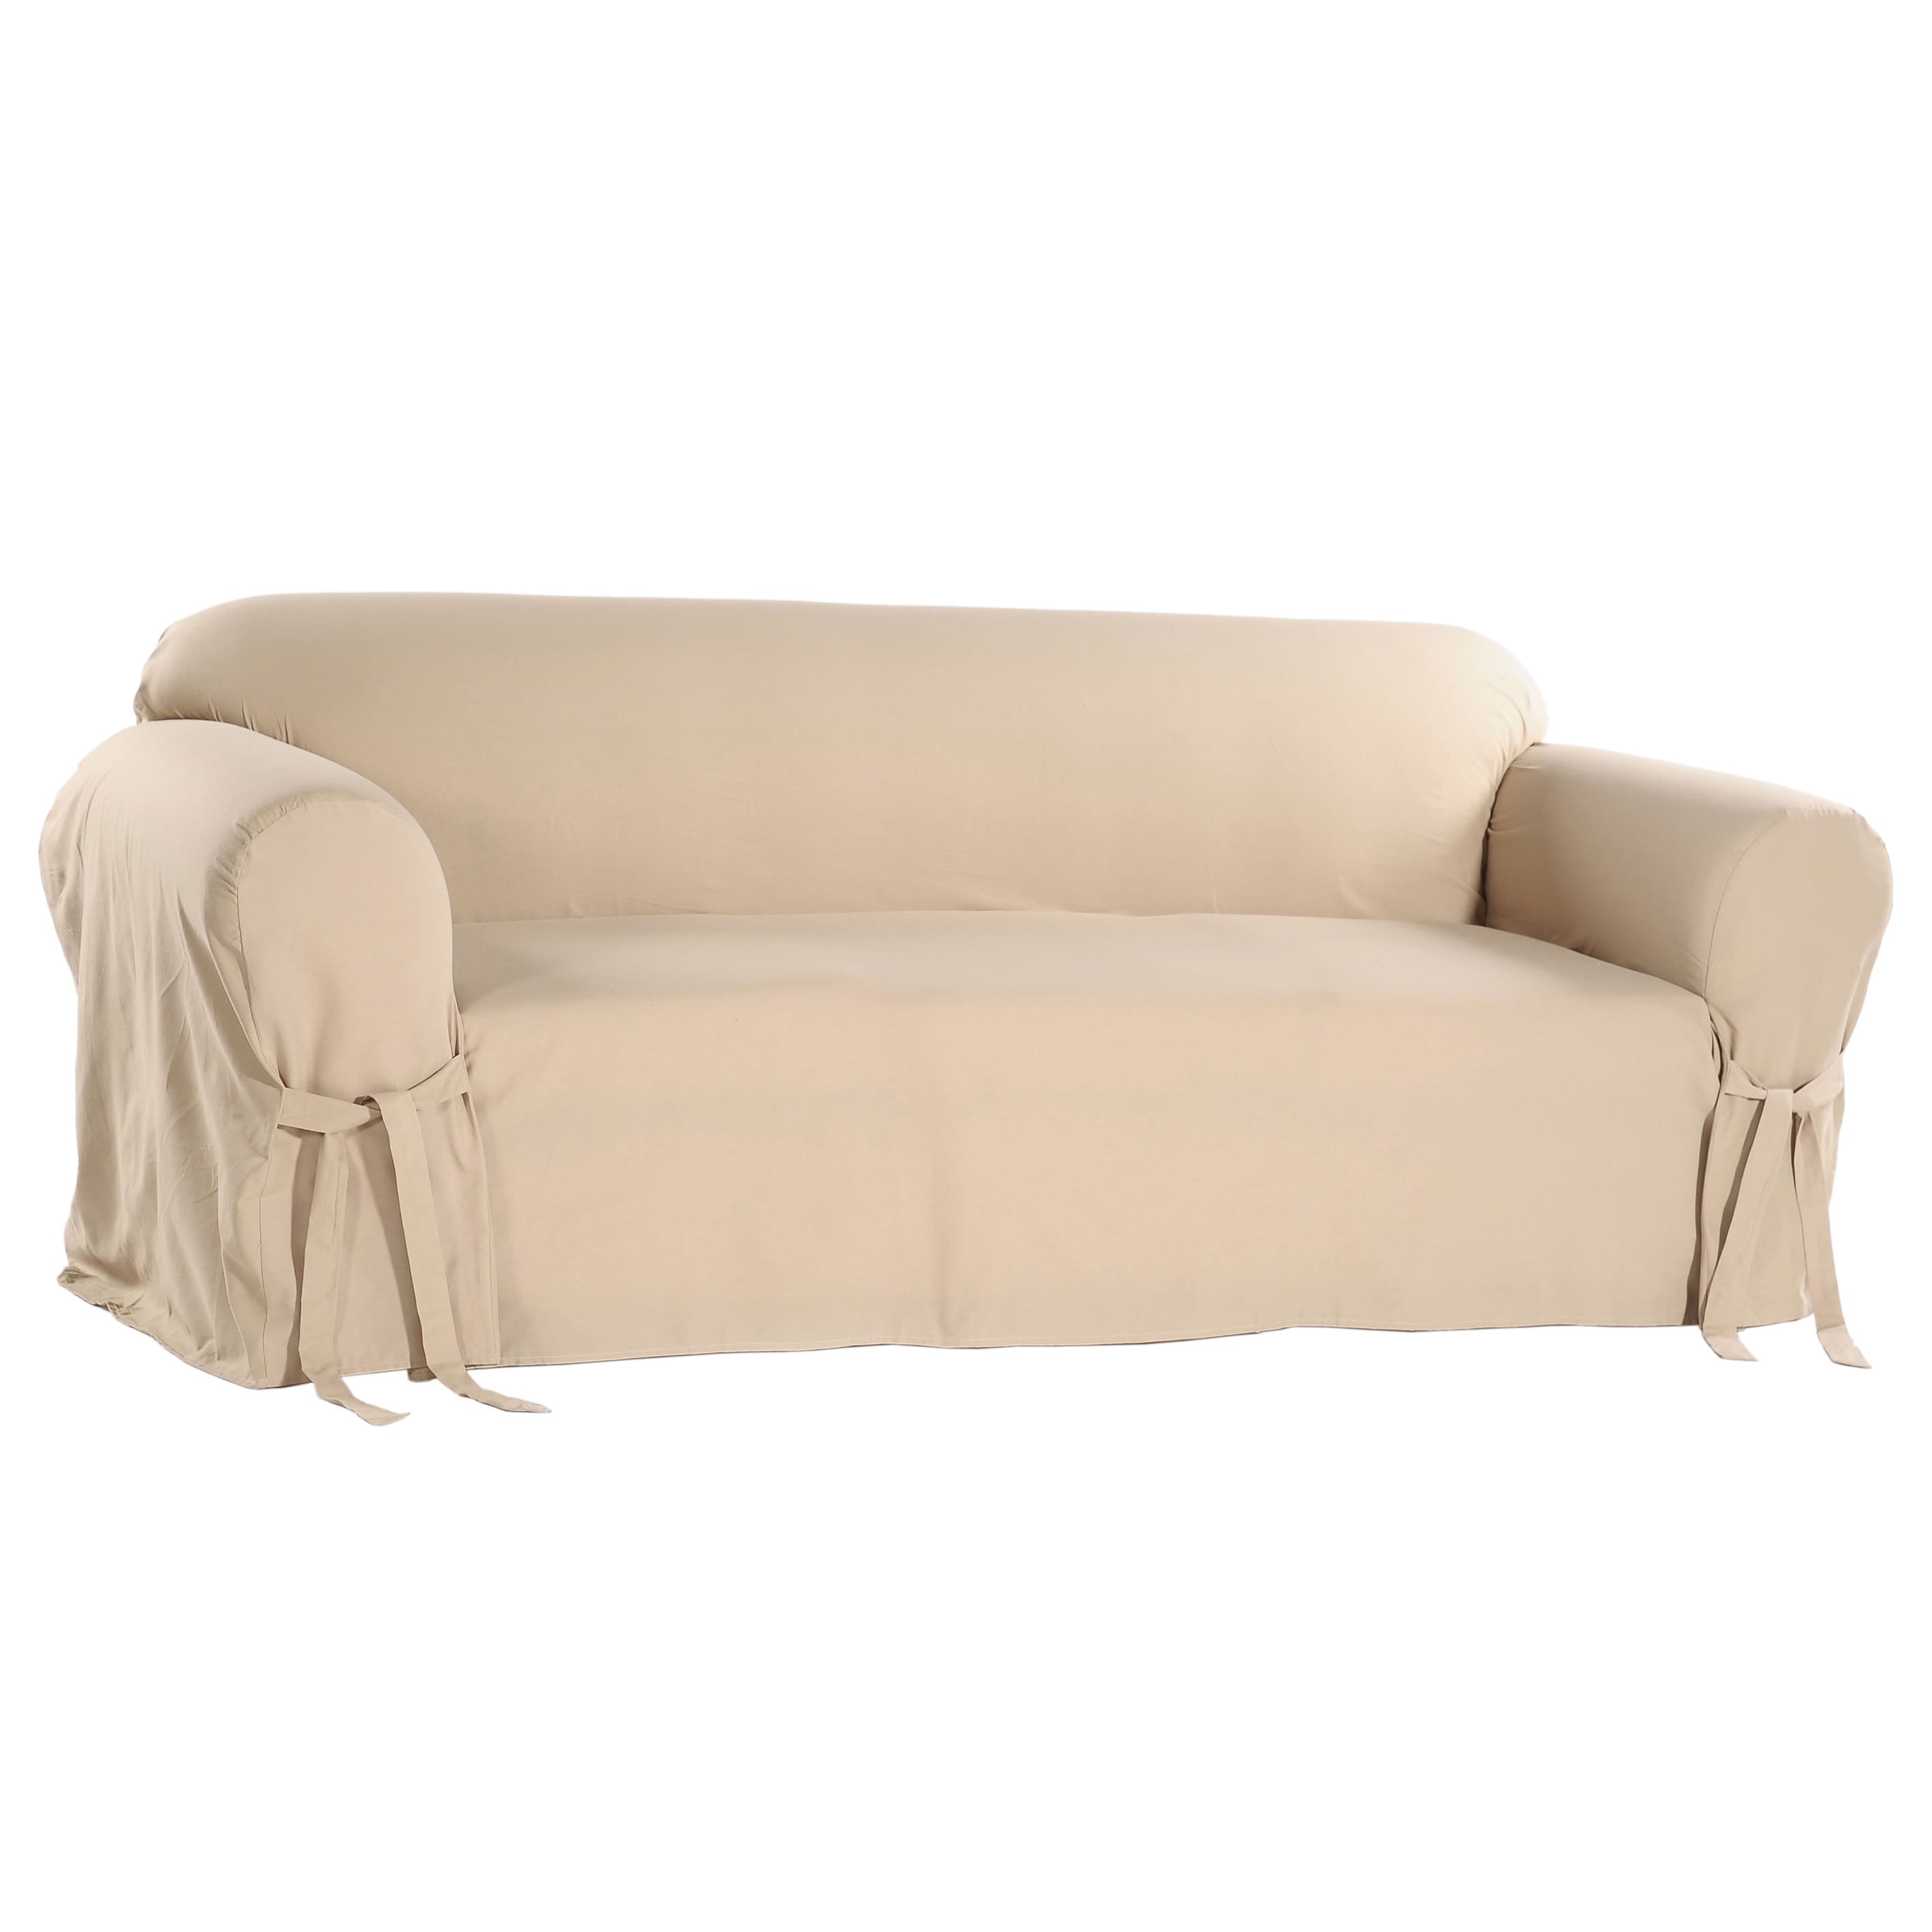 Cotton Duck Casual fit Loveseat Slipcover